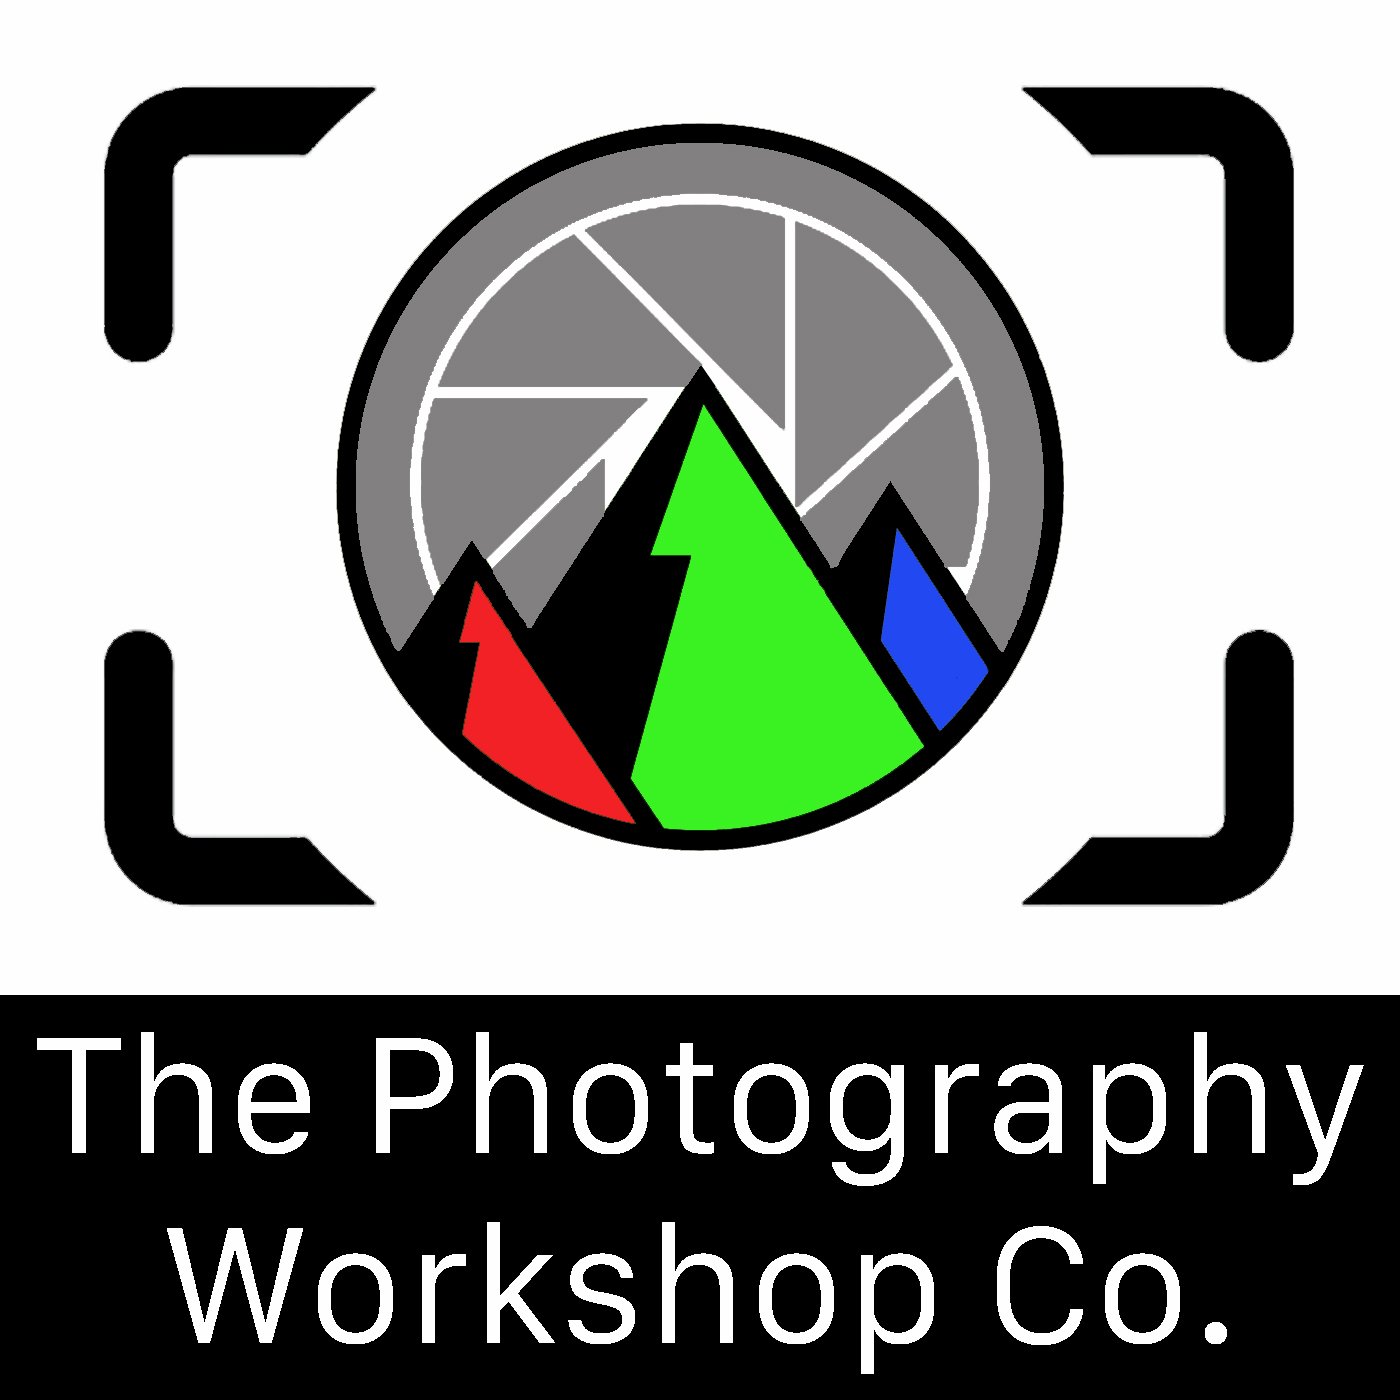 The Photography Workshop Co